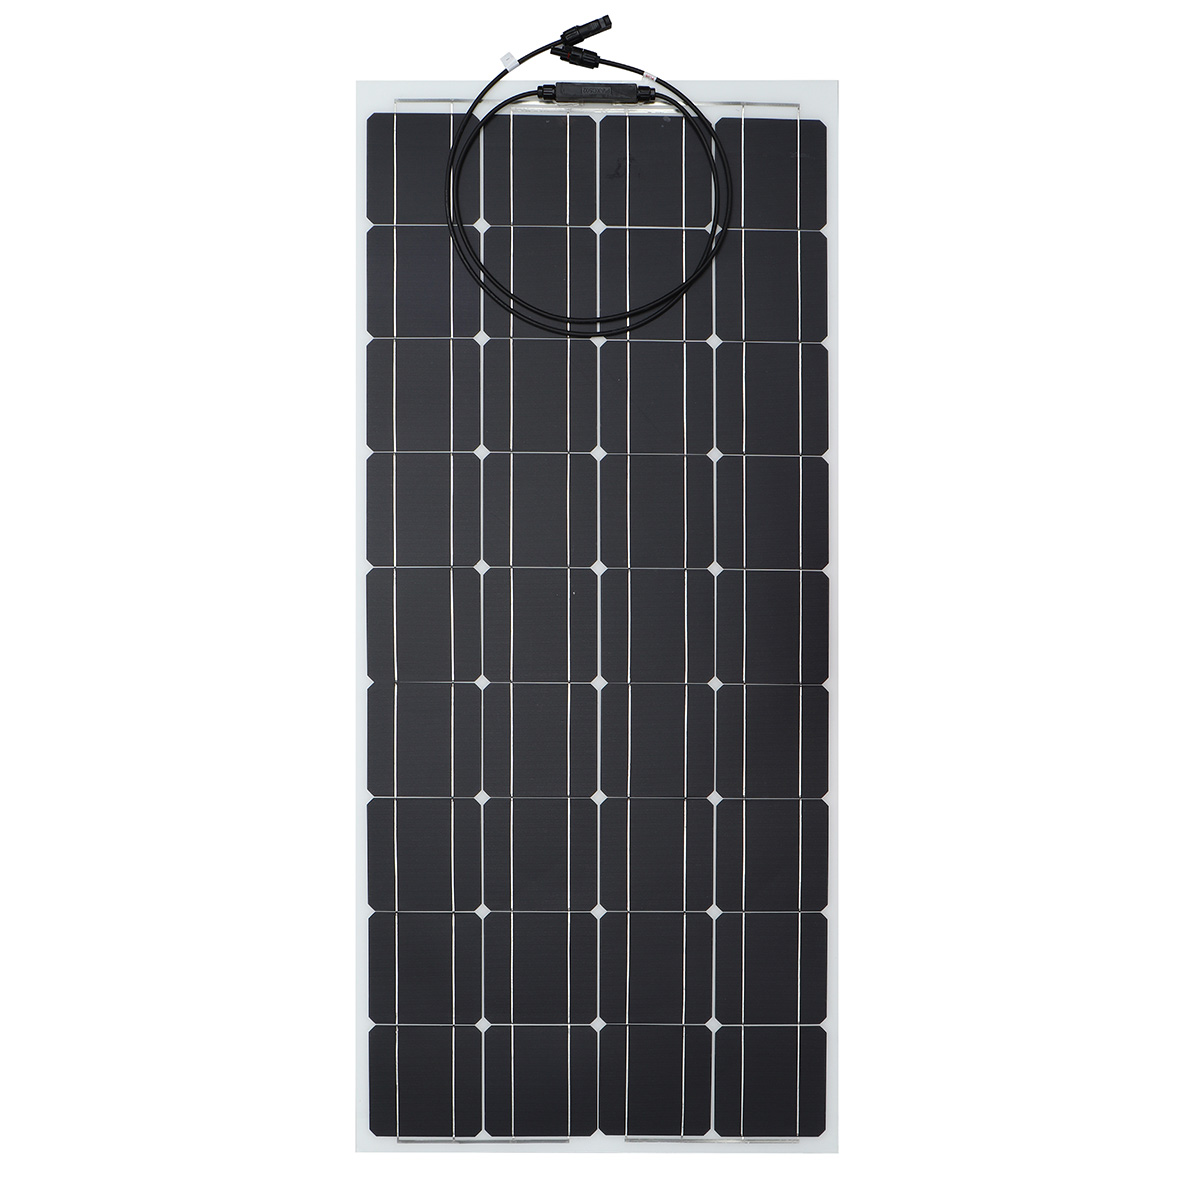 

18V 100W Flexible Solar Panel Mono Silicone Module for Boat Roof RV Car Battery Power Charger